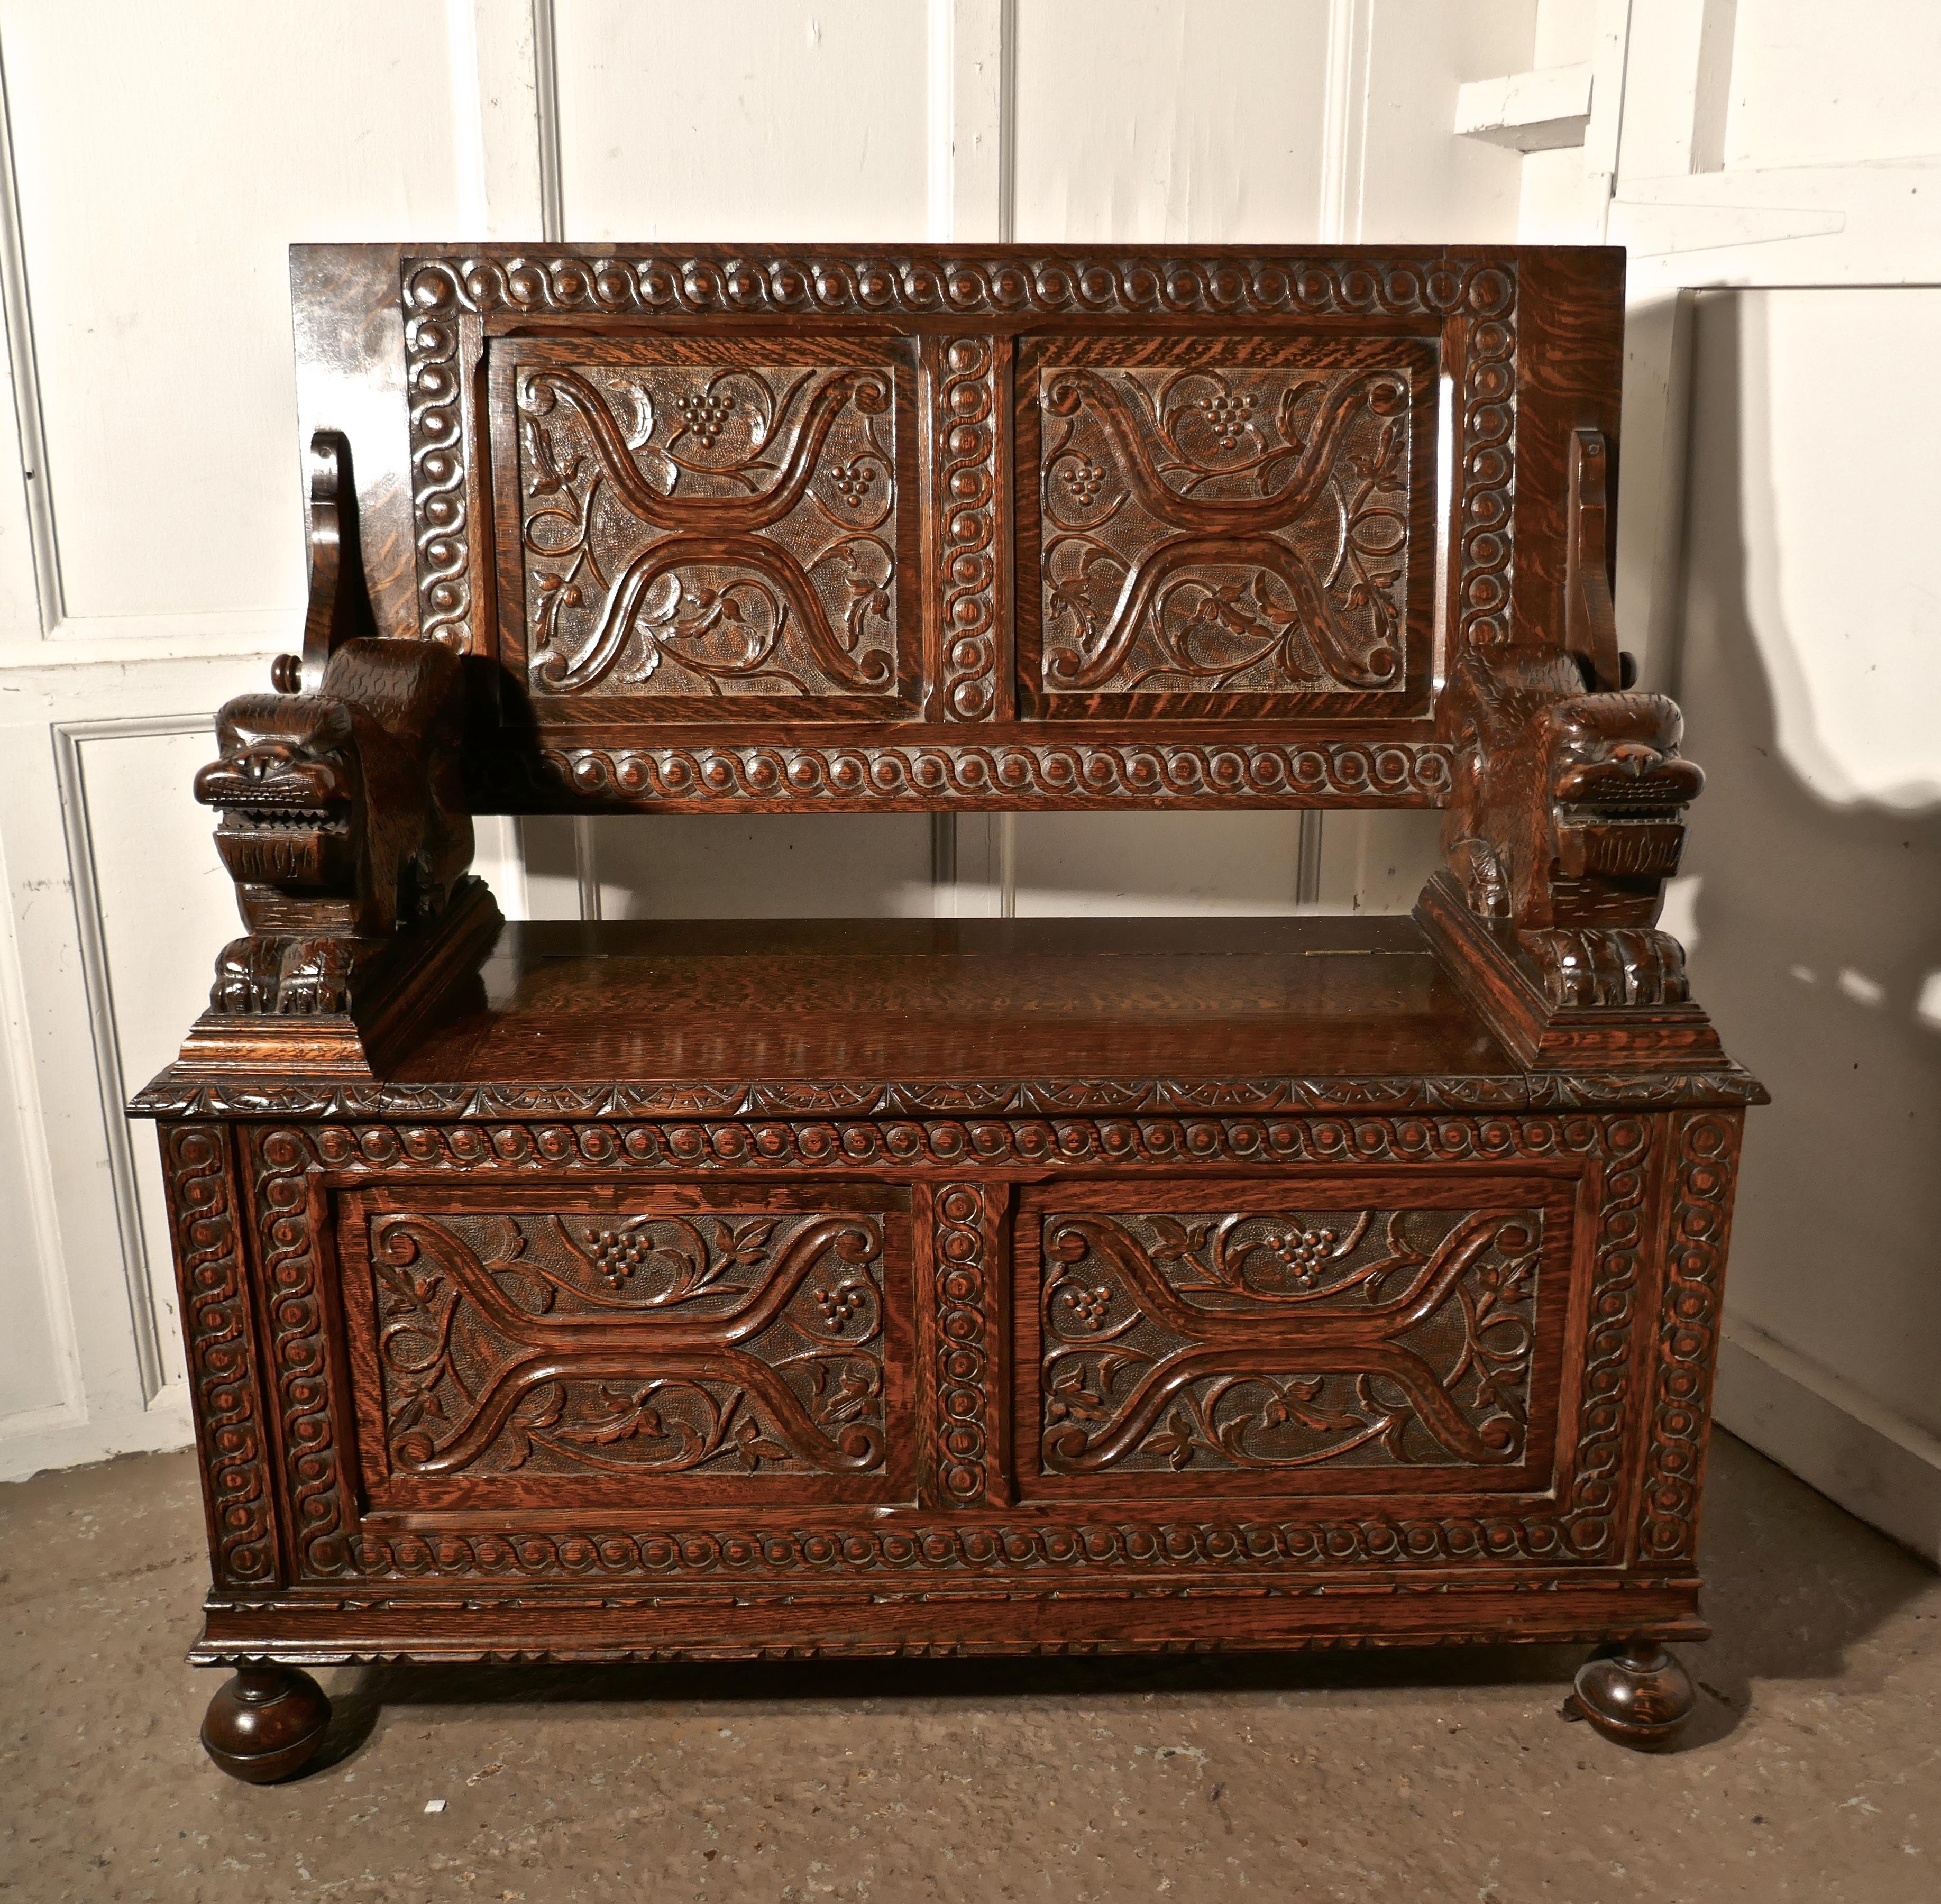 19th century carved oak monks bench settle, hall table.

This unusual piece is known as a Monks Bench, it is fact a settle with storage compartment inside the seat and the back of the bench can be pulled over, it then rests on the on the top of